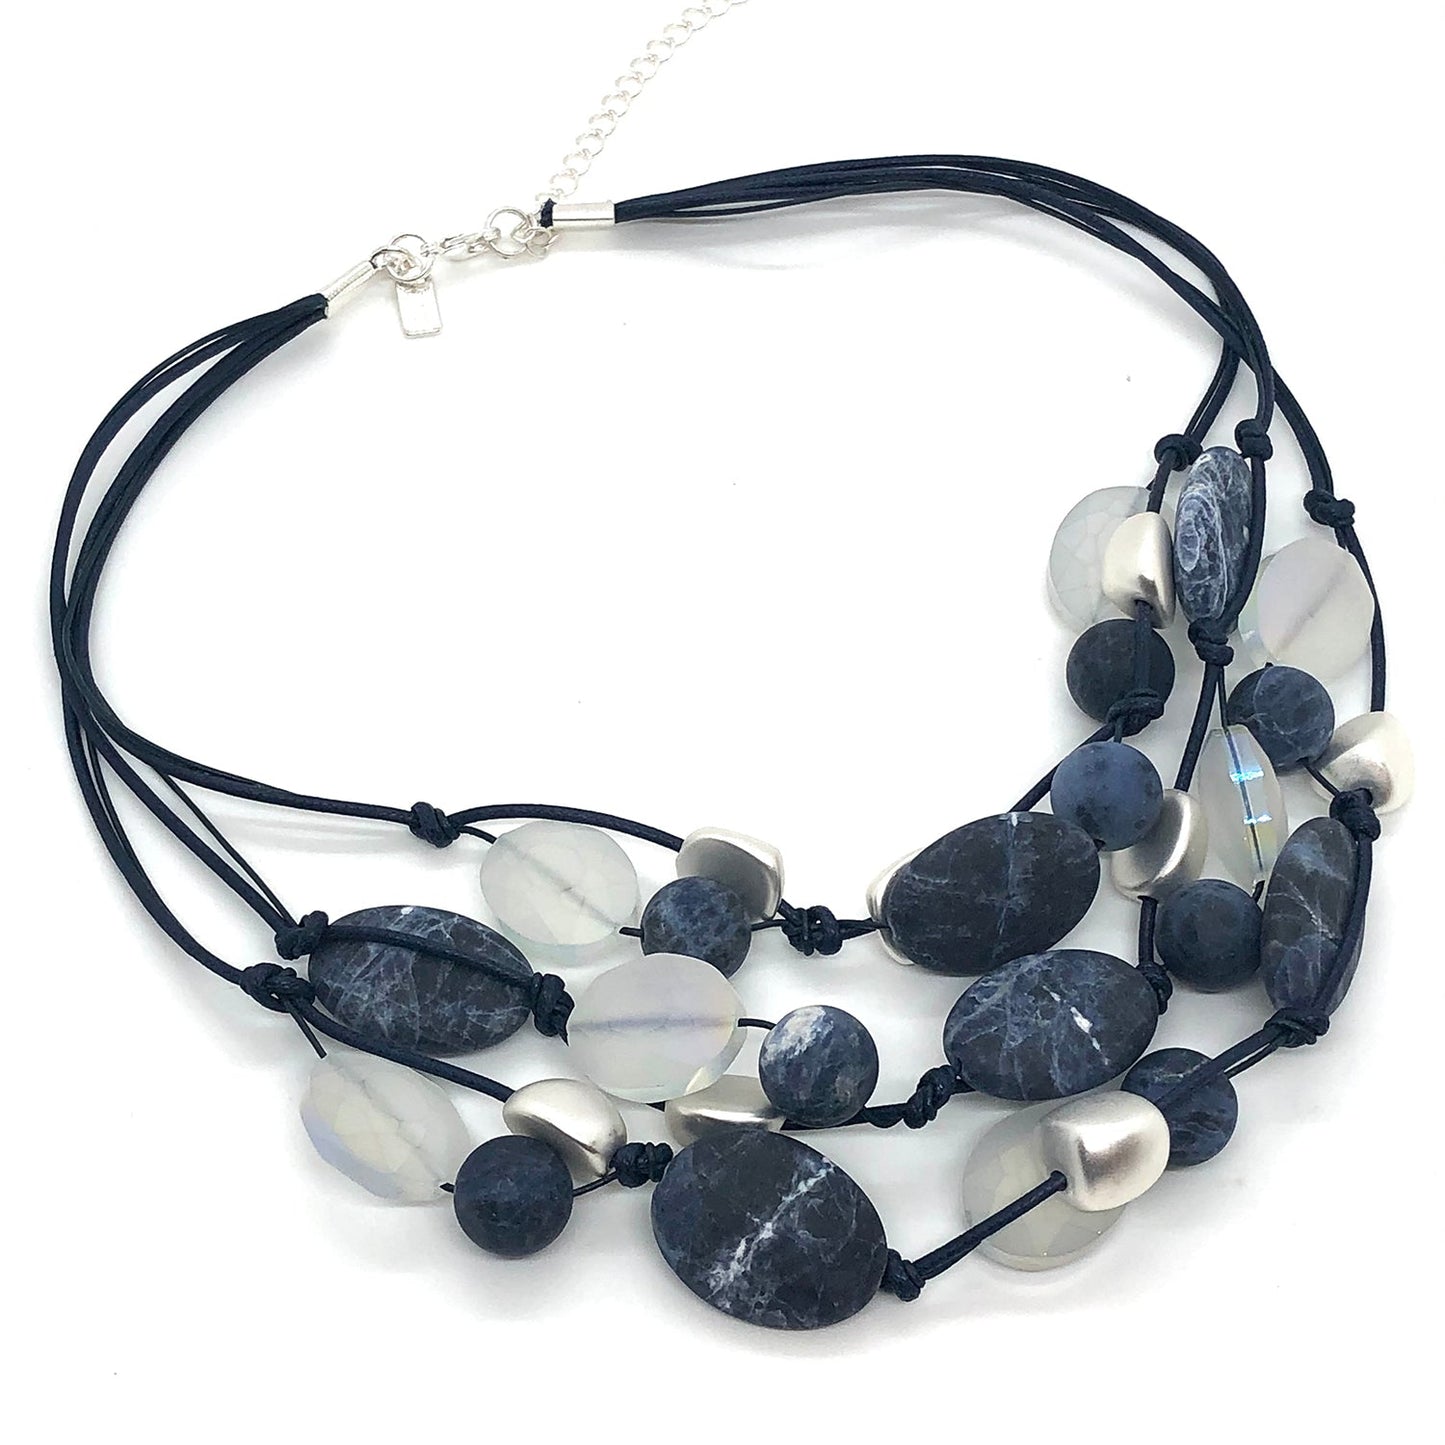 Blue Sodalite And Matte Silver Crystal Torsade Necklace